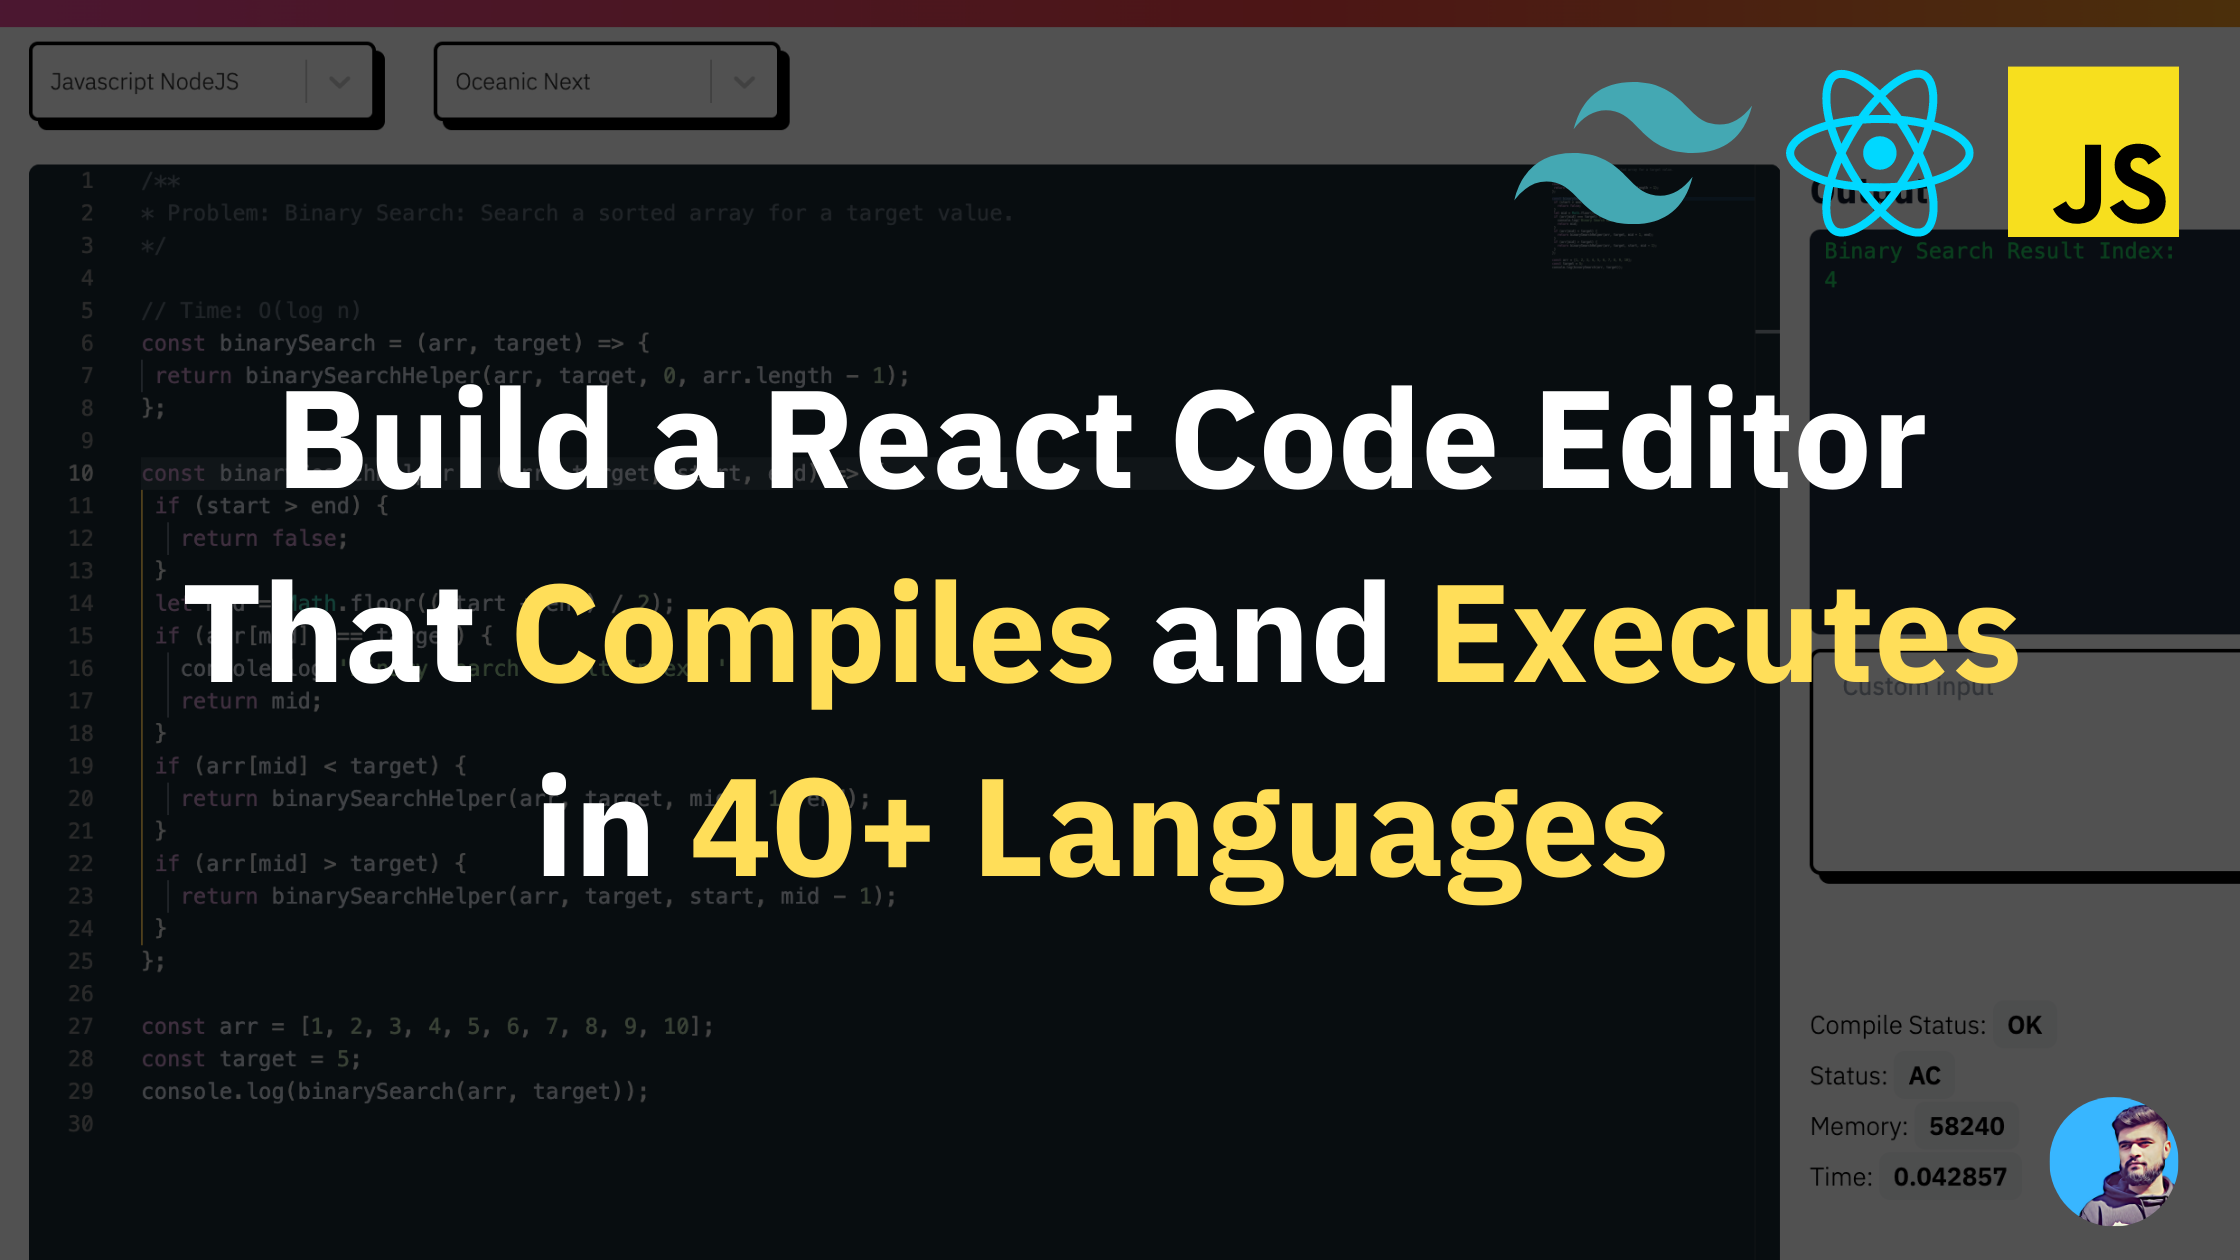 How to Build a Code Editor with React that Compiles and Executes in 40+ Languages